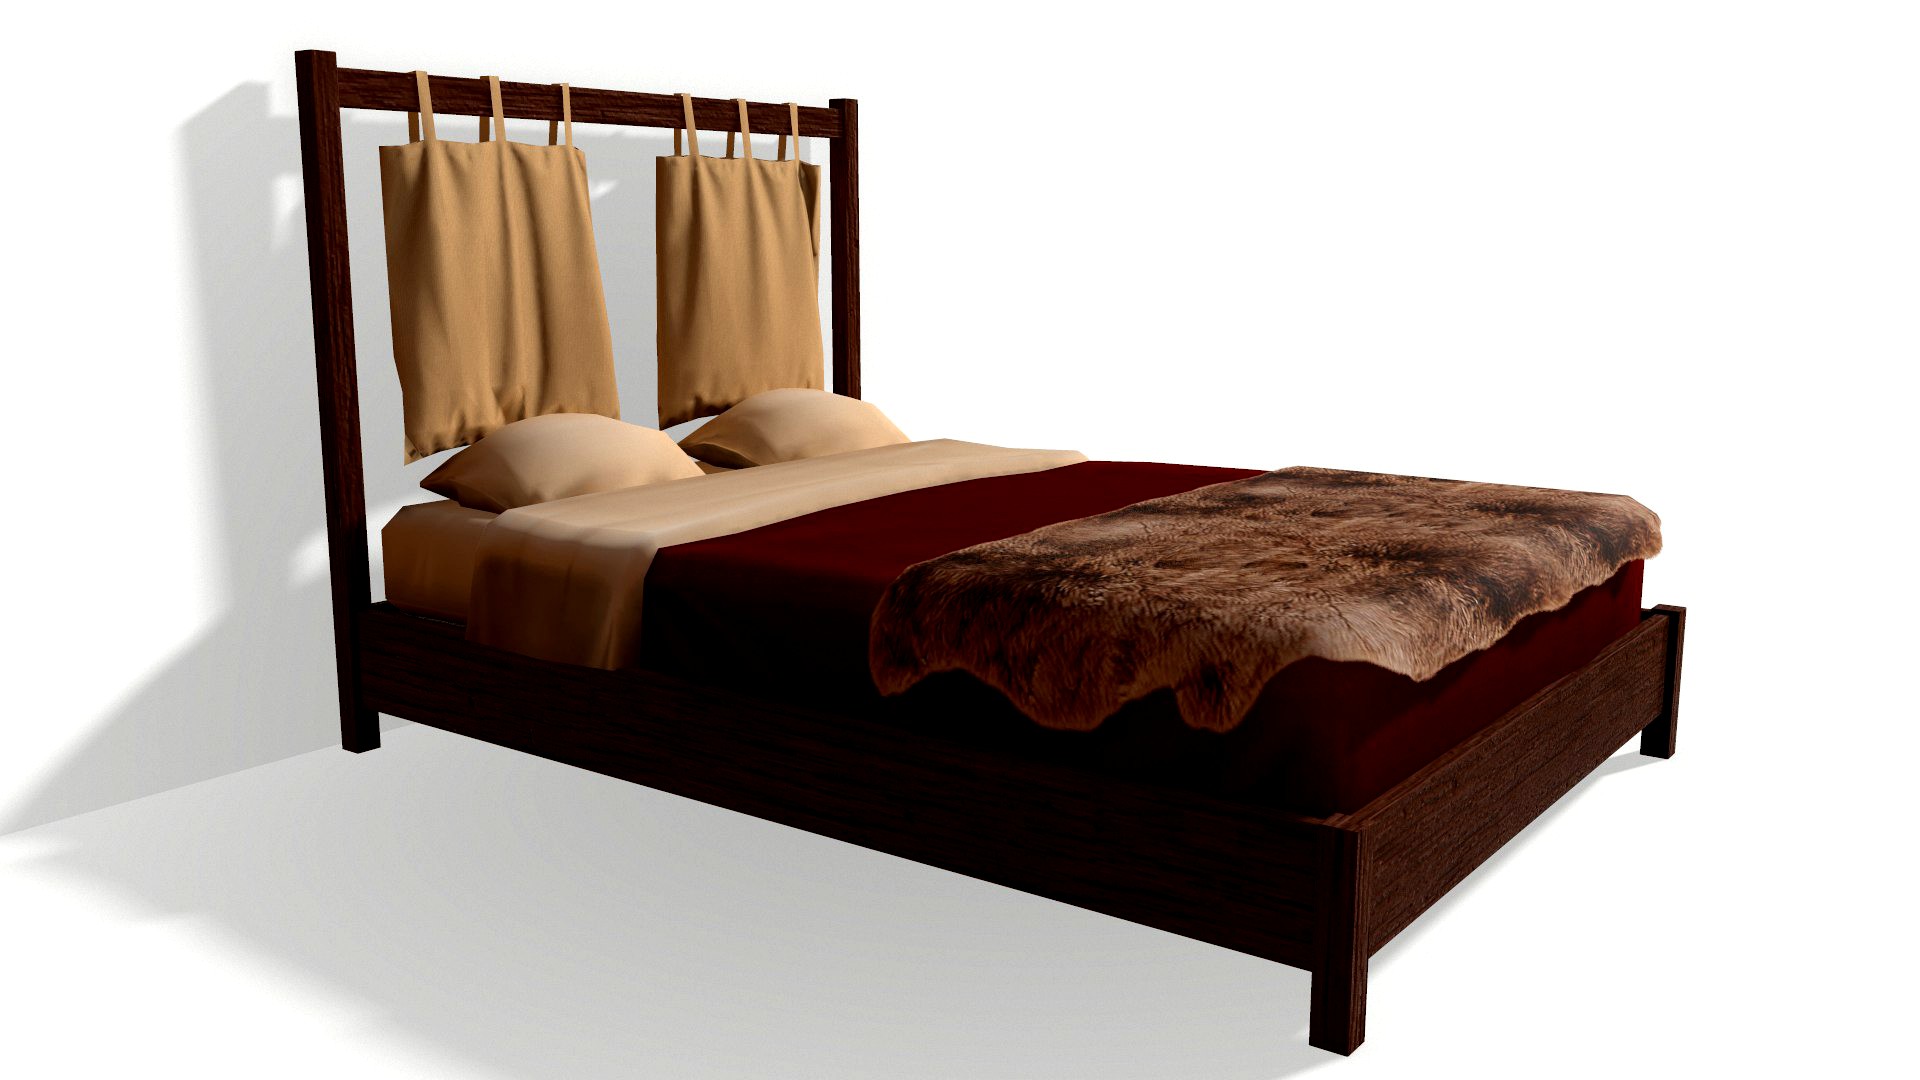 North style double bed October